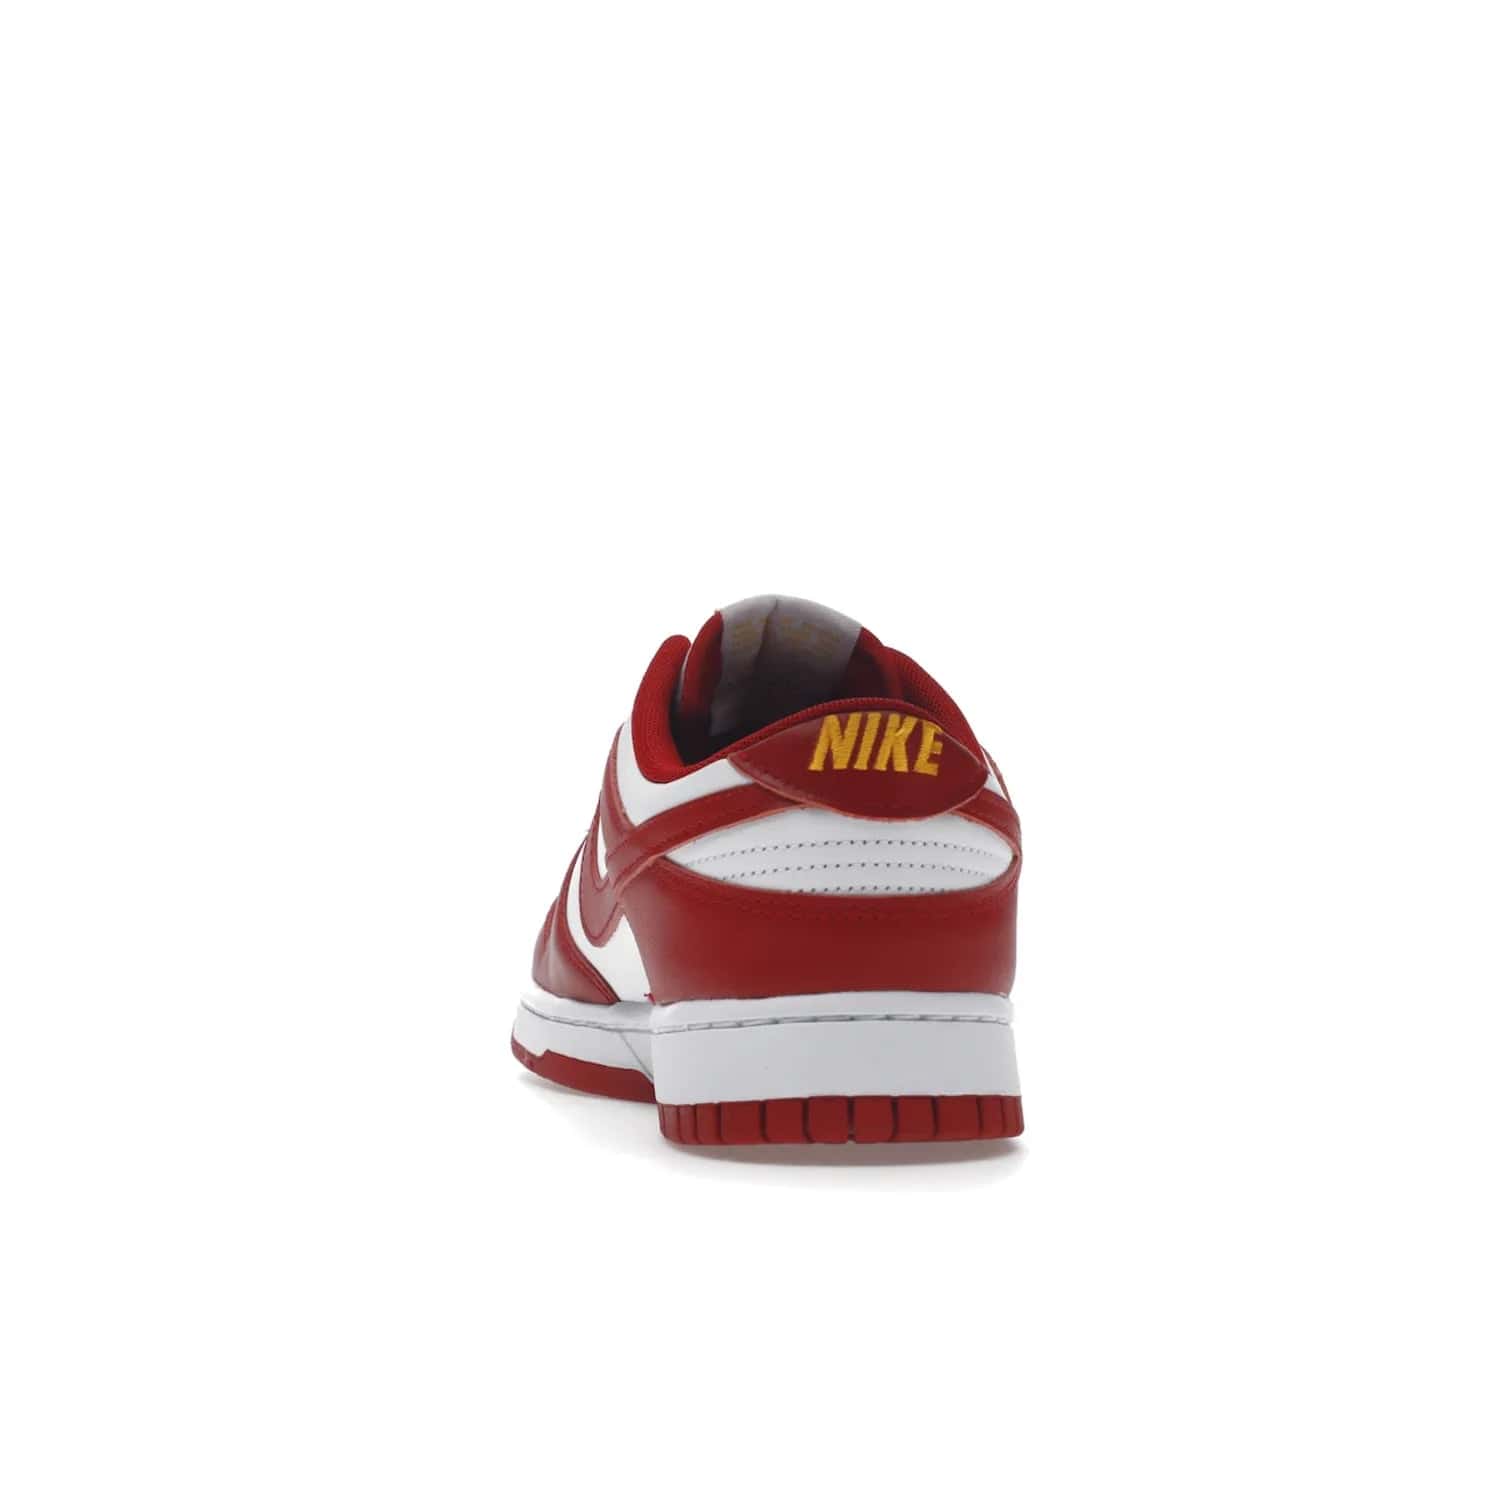 Nike Dunk Low USC - Image 27 - Only at www.BallersClubKickz.com - The Nike Dunk Low USC DD1391-602 colorway captures the eye of University of Southern California fans. Crafted with leather and rubber upper and outsole, this stylish sneaker features a white, gym red, and yellow colorway. With yellow Nike branding, white perforated vamp, and red suede Swoosh, this sneaker turns heads. Get the classic Nike Dunk Low USC releasing on November 9th, 2022.